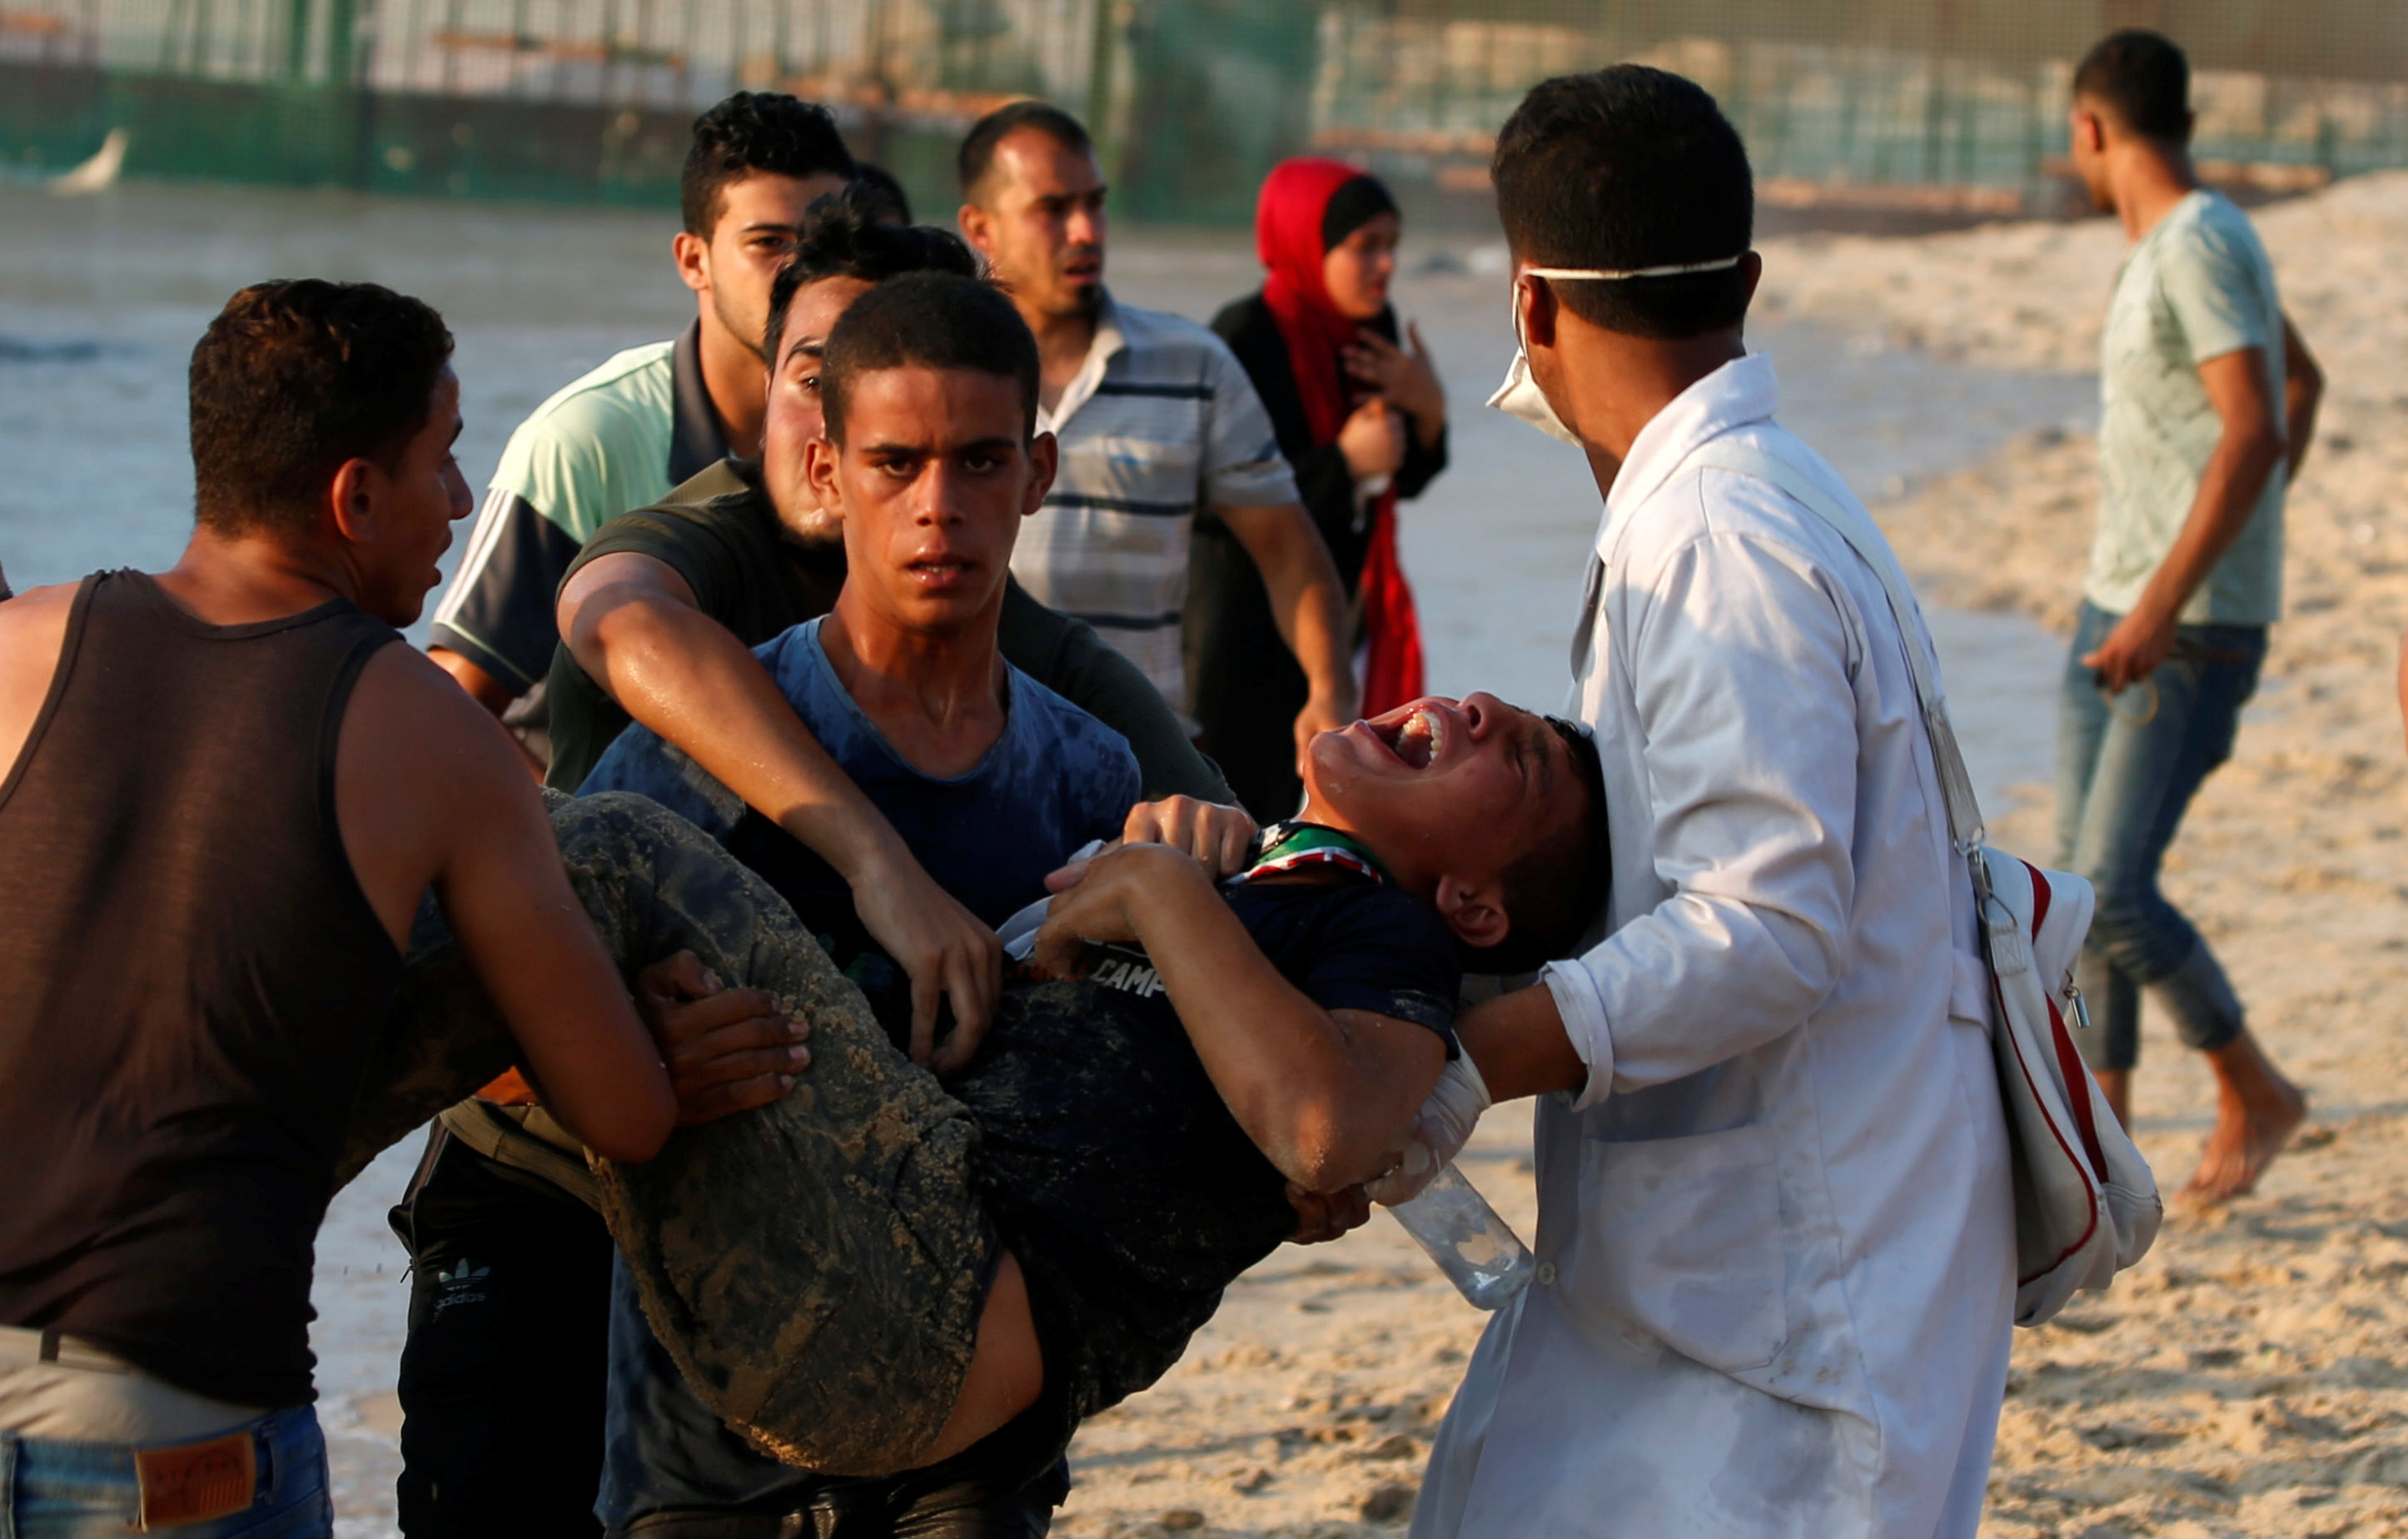 Wounded Palestinian is evacuated during a protest calling for lifting the Israeli blockade on Gaza, on a beach near the maritime border with Israel, in the northern Gaza Strip